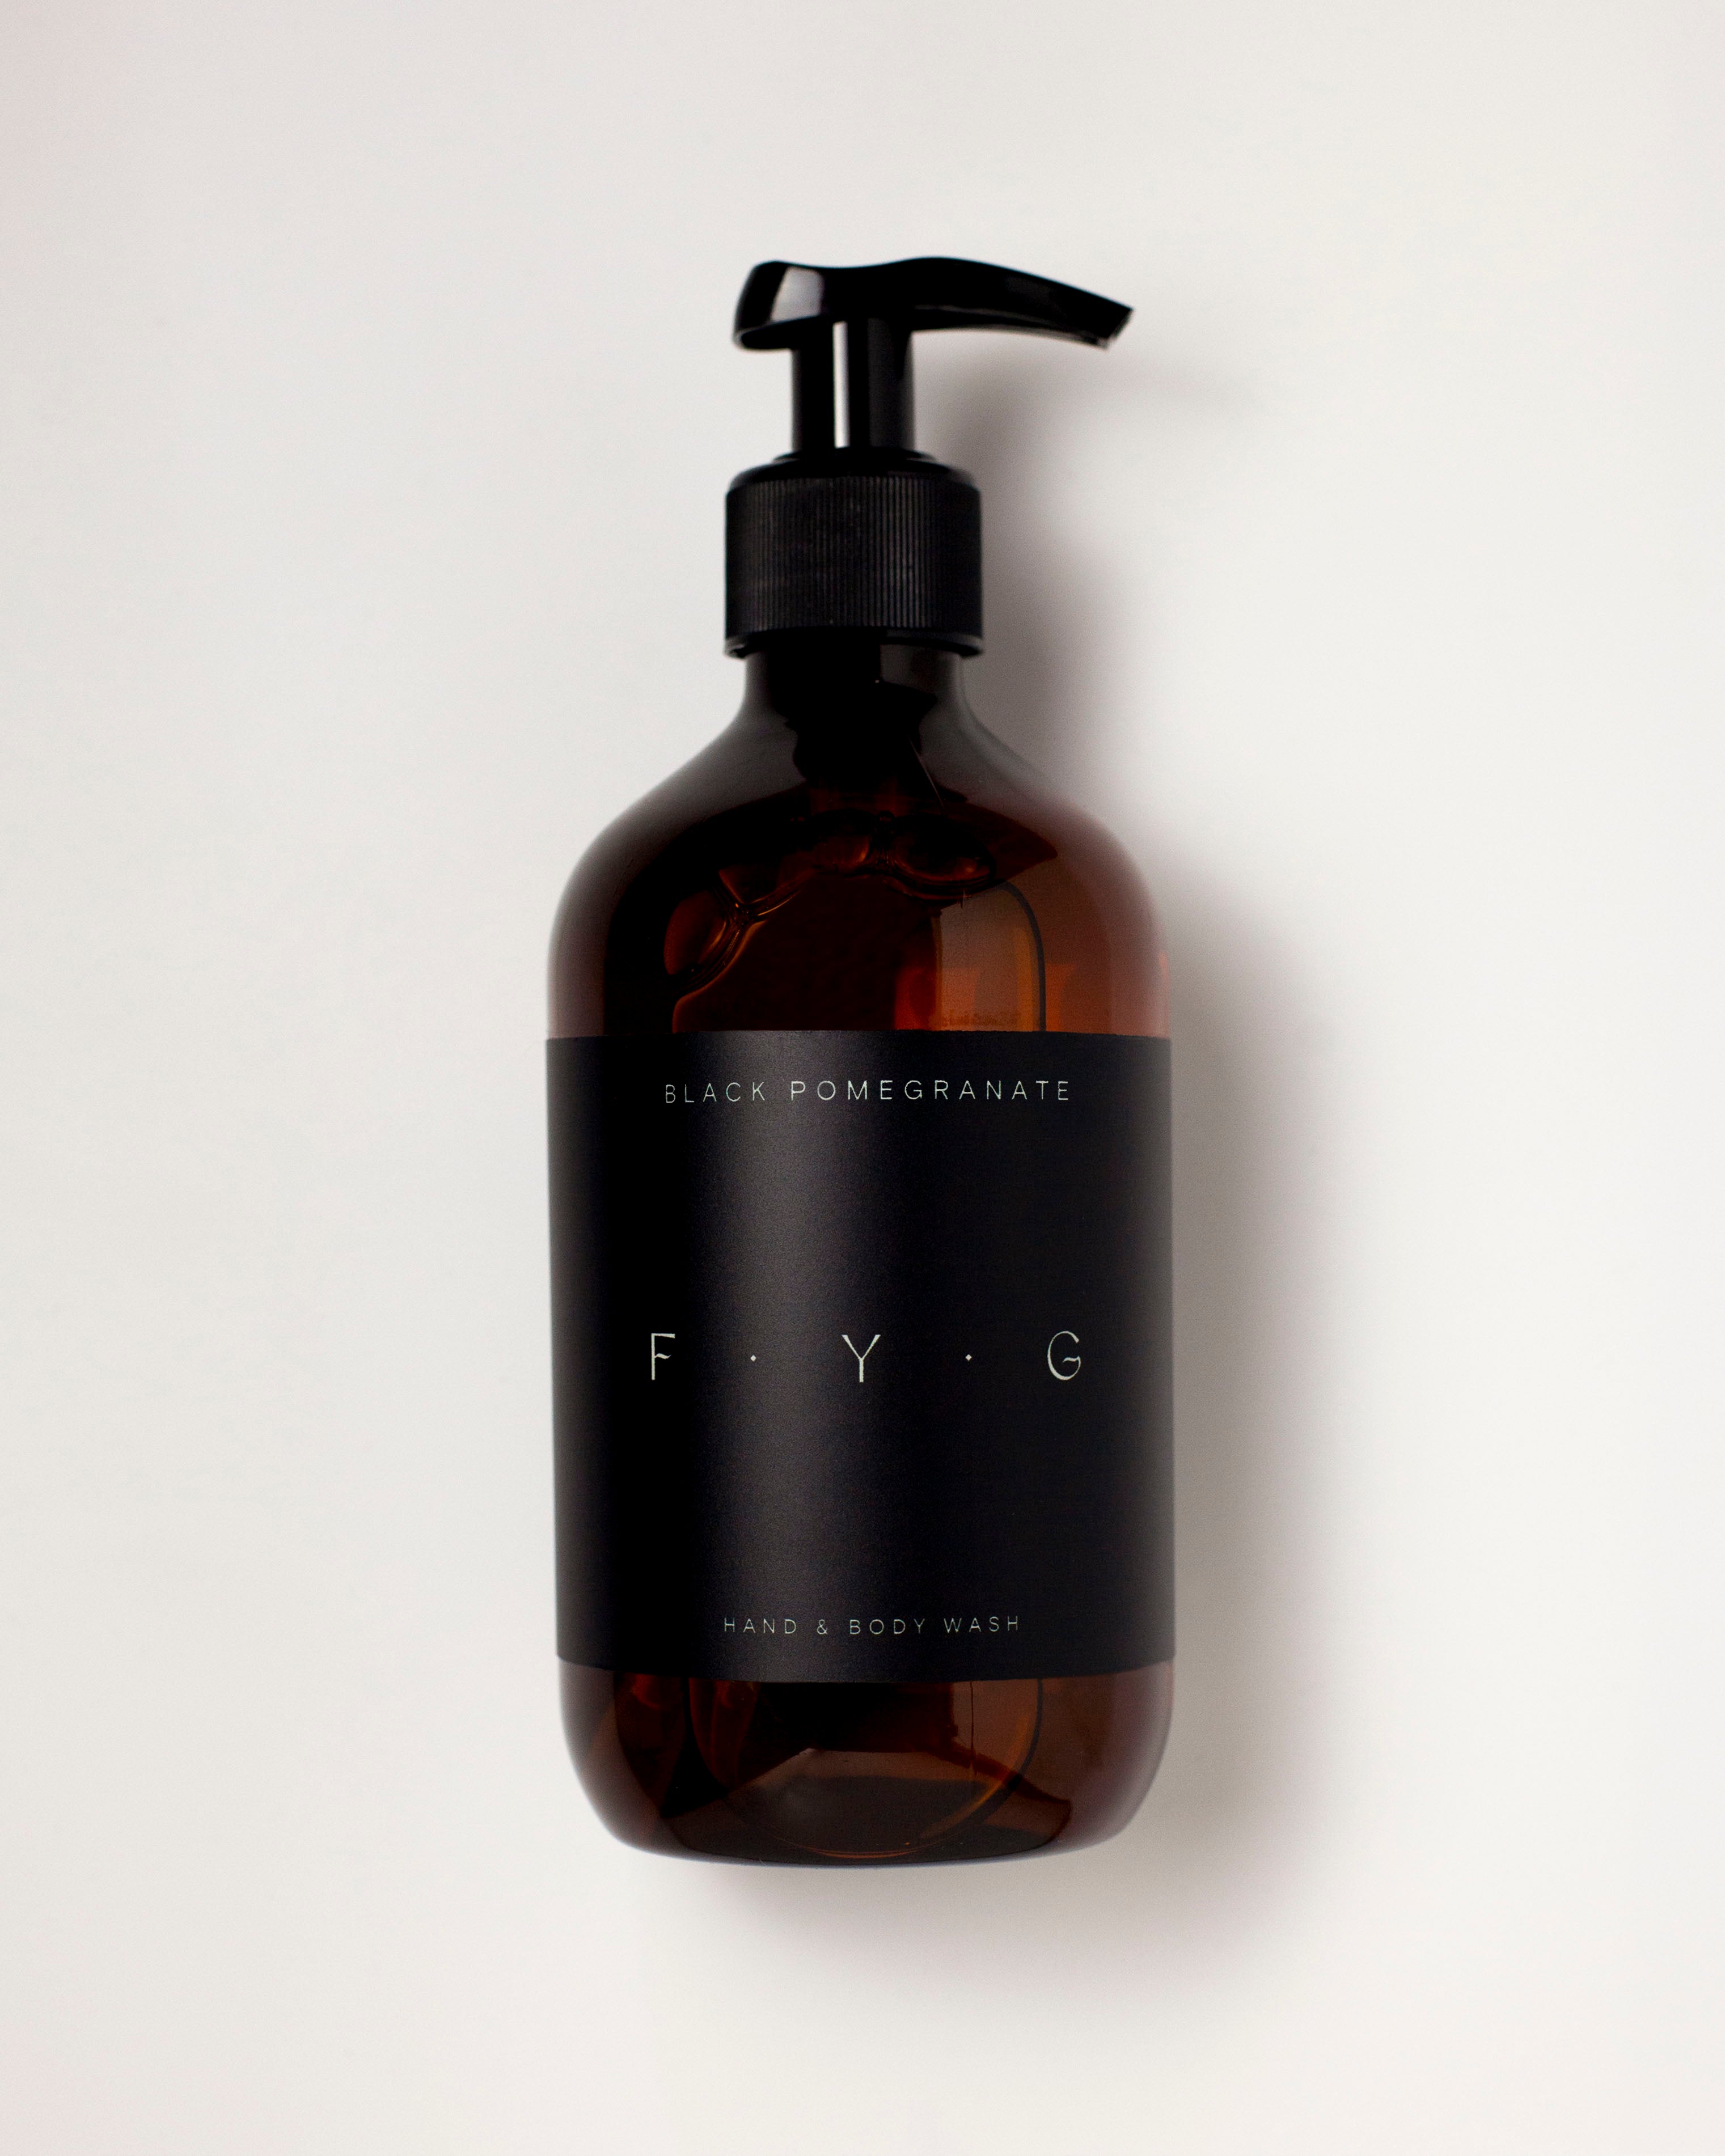 Find Your Glow Black Pomegranate Hand & Body Wash